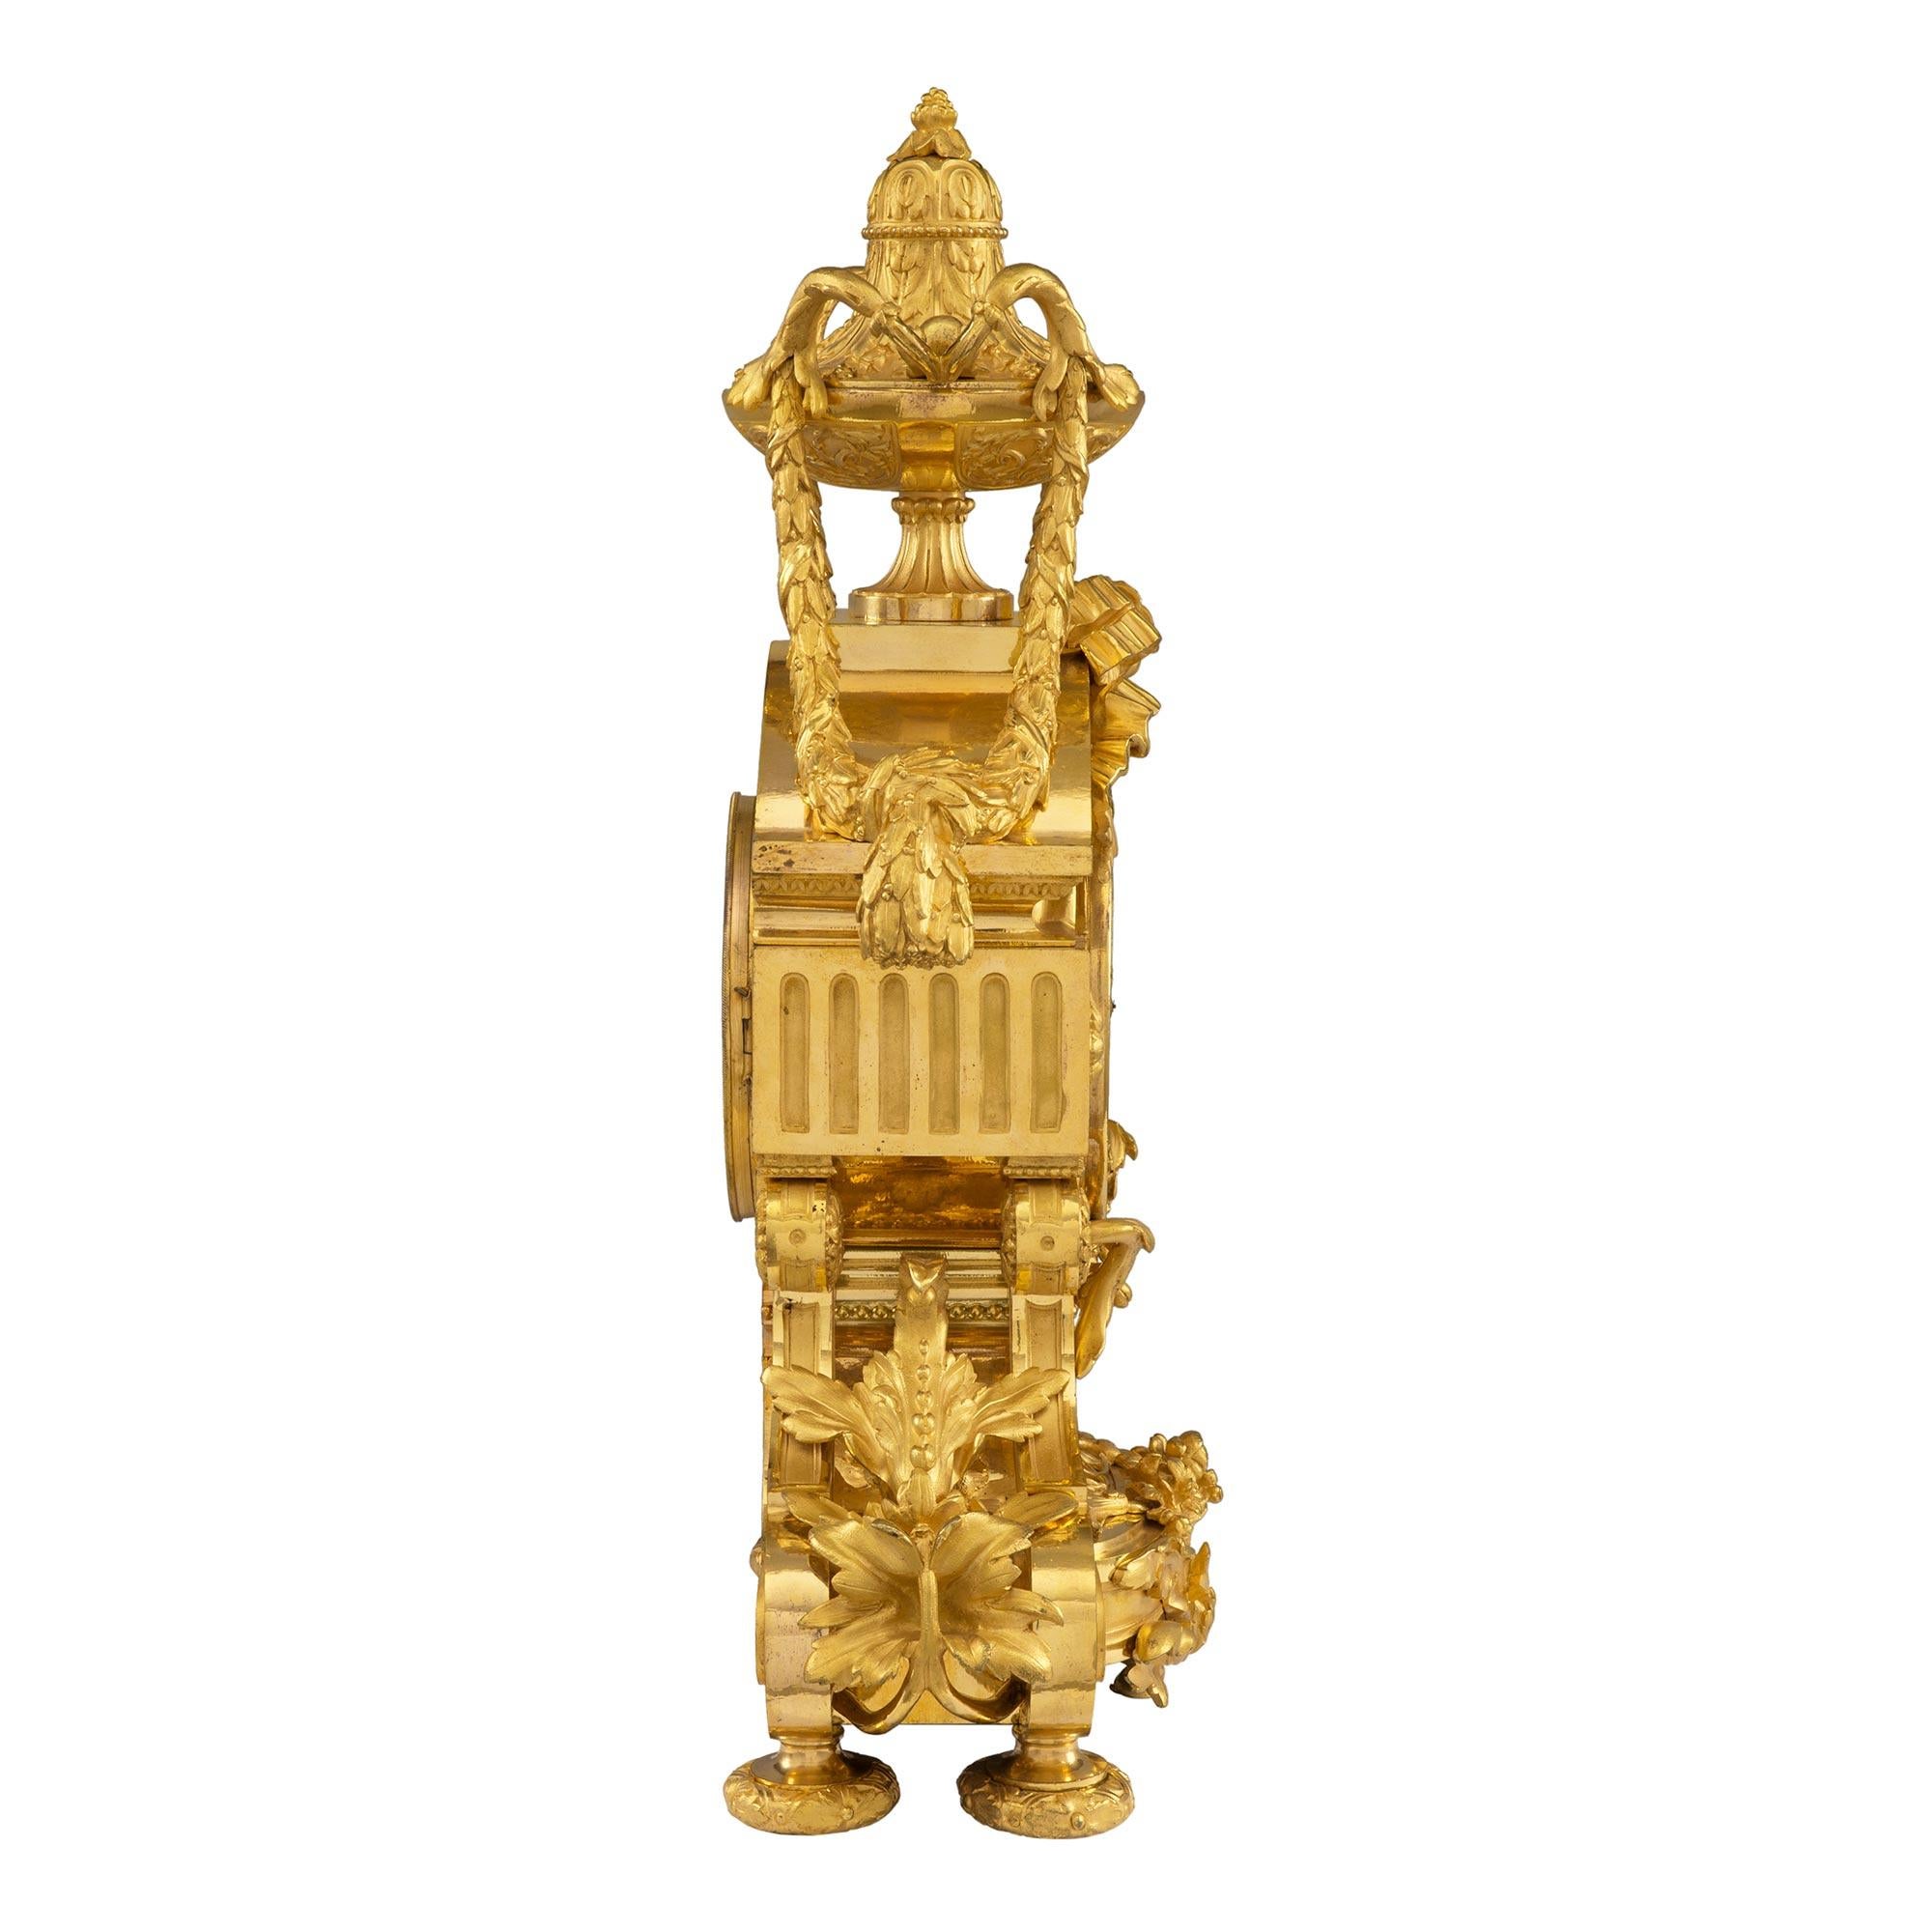 French 19th Century Louis XVI Style Belle Époque Period Ormolu Clock In Good Condition For Sale In West Palm Beach, FL